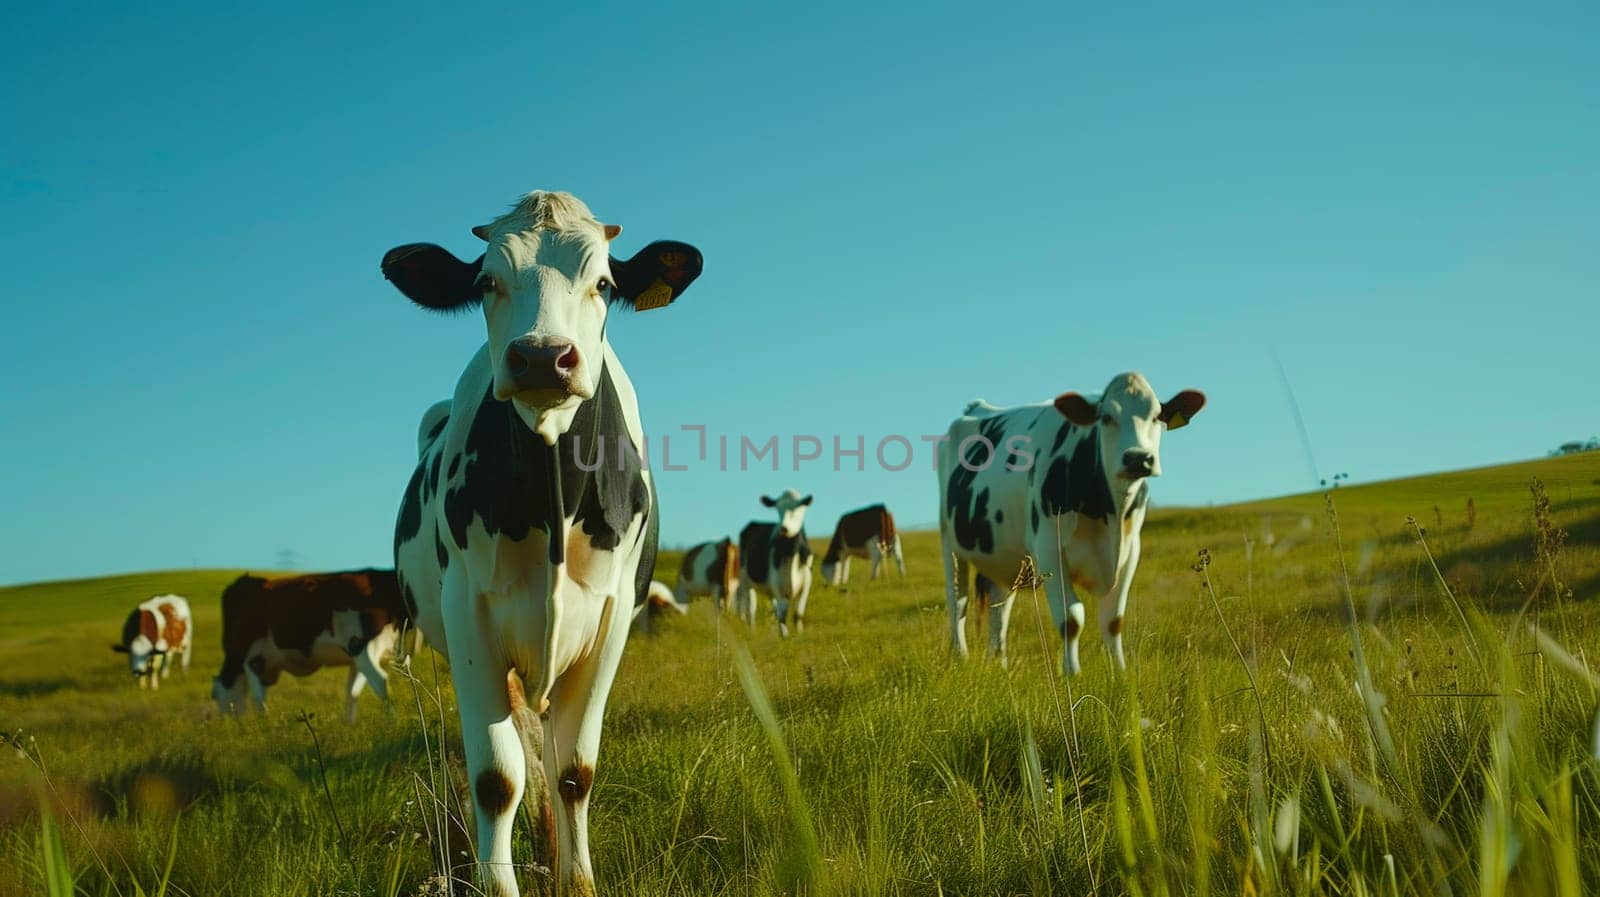 Cow farm, An image of cows in a meadow, Agriculture animal, organic farm.